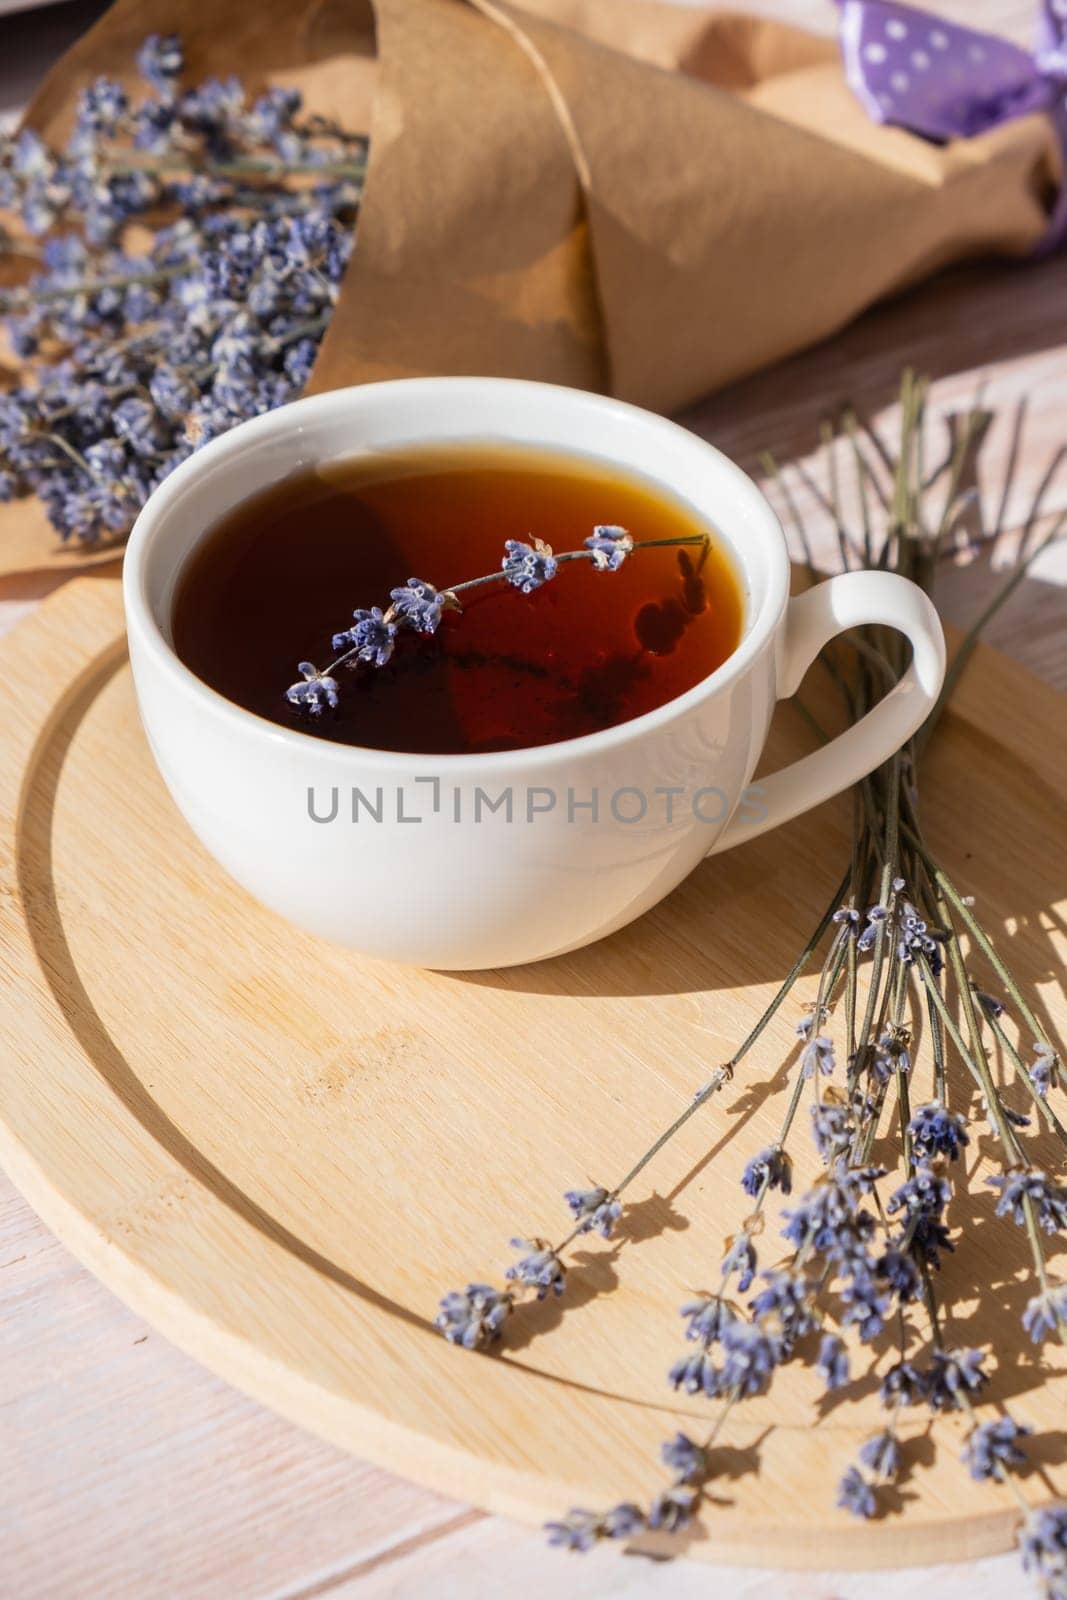 Healthy homemade cup of lavender tea. Organic natural home grown herb for teas. White cup of tea with dried lavender flowers. Healthy living wellbeing self care